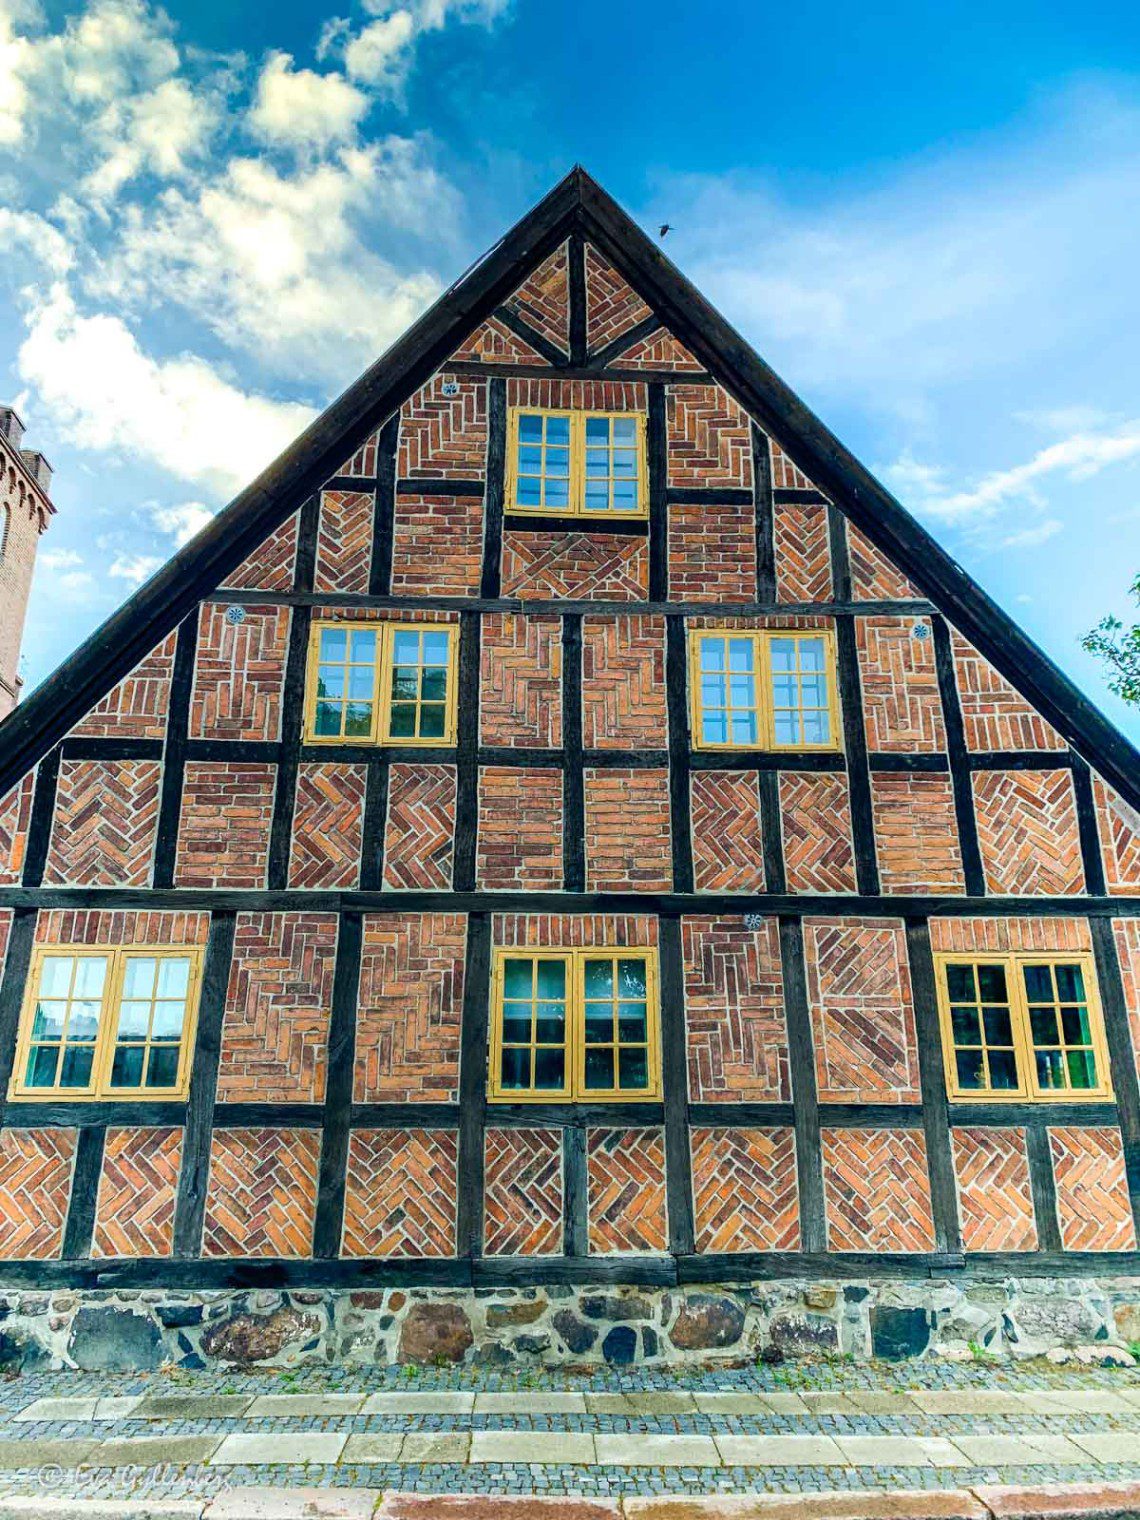 Tall half-timbered house with brick in Lund